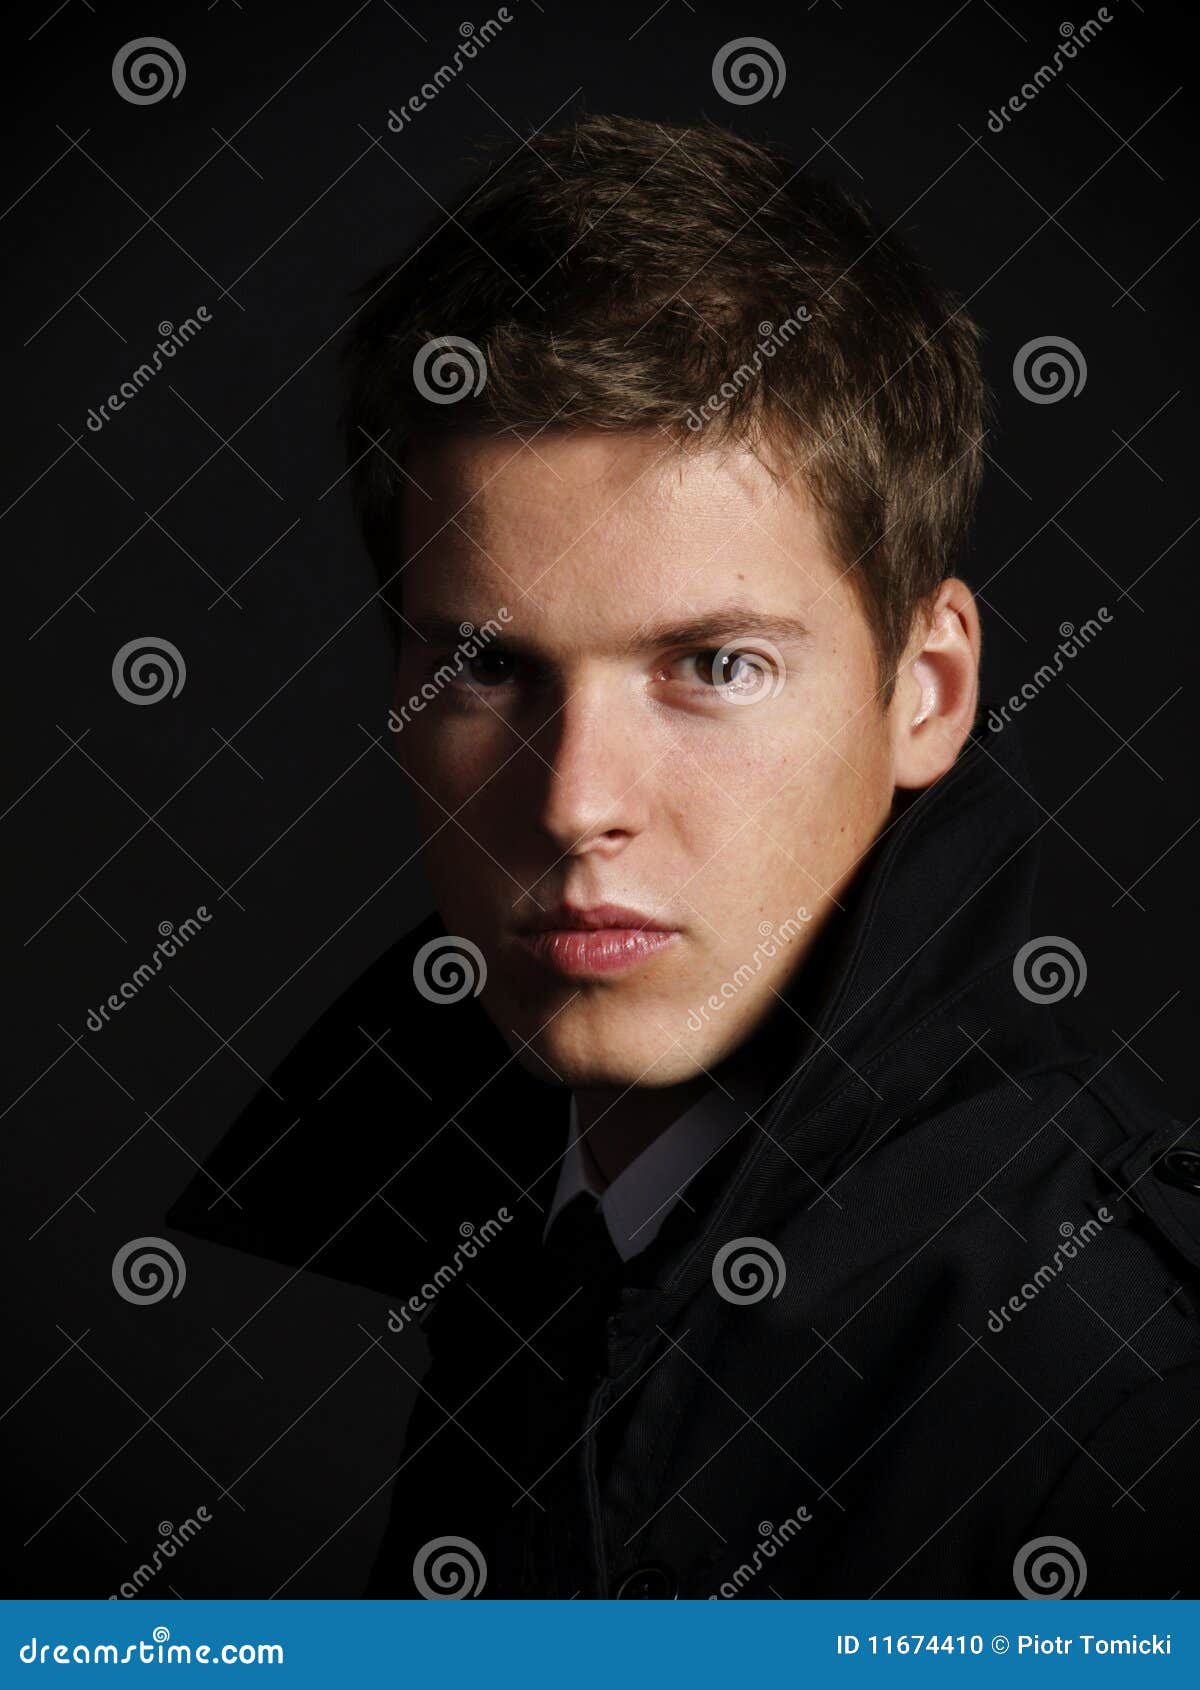 Handsome young male model stock photo. Image of model - 11674410